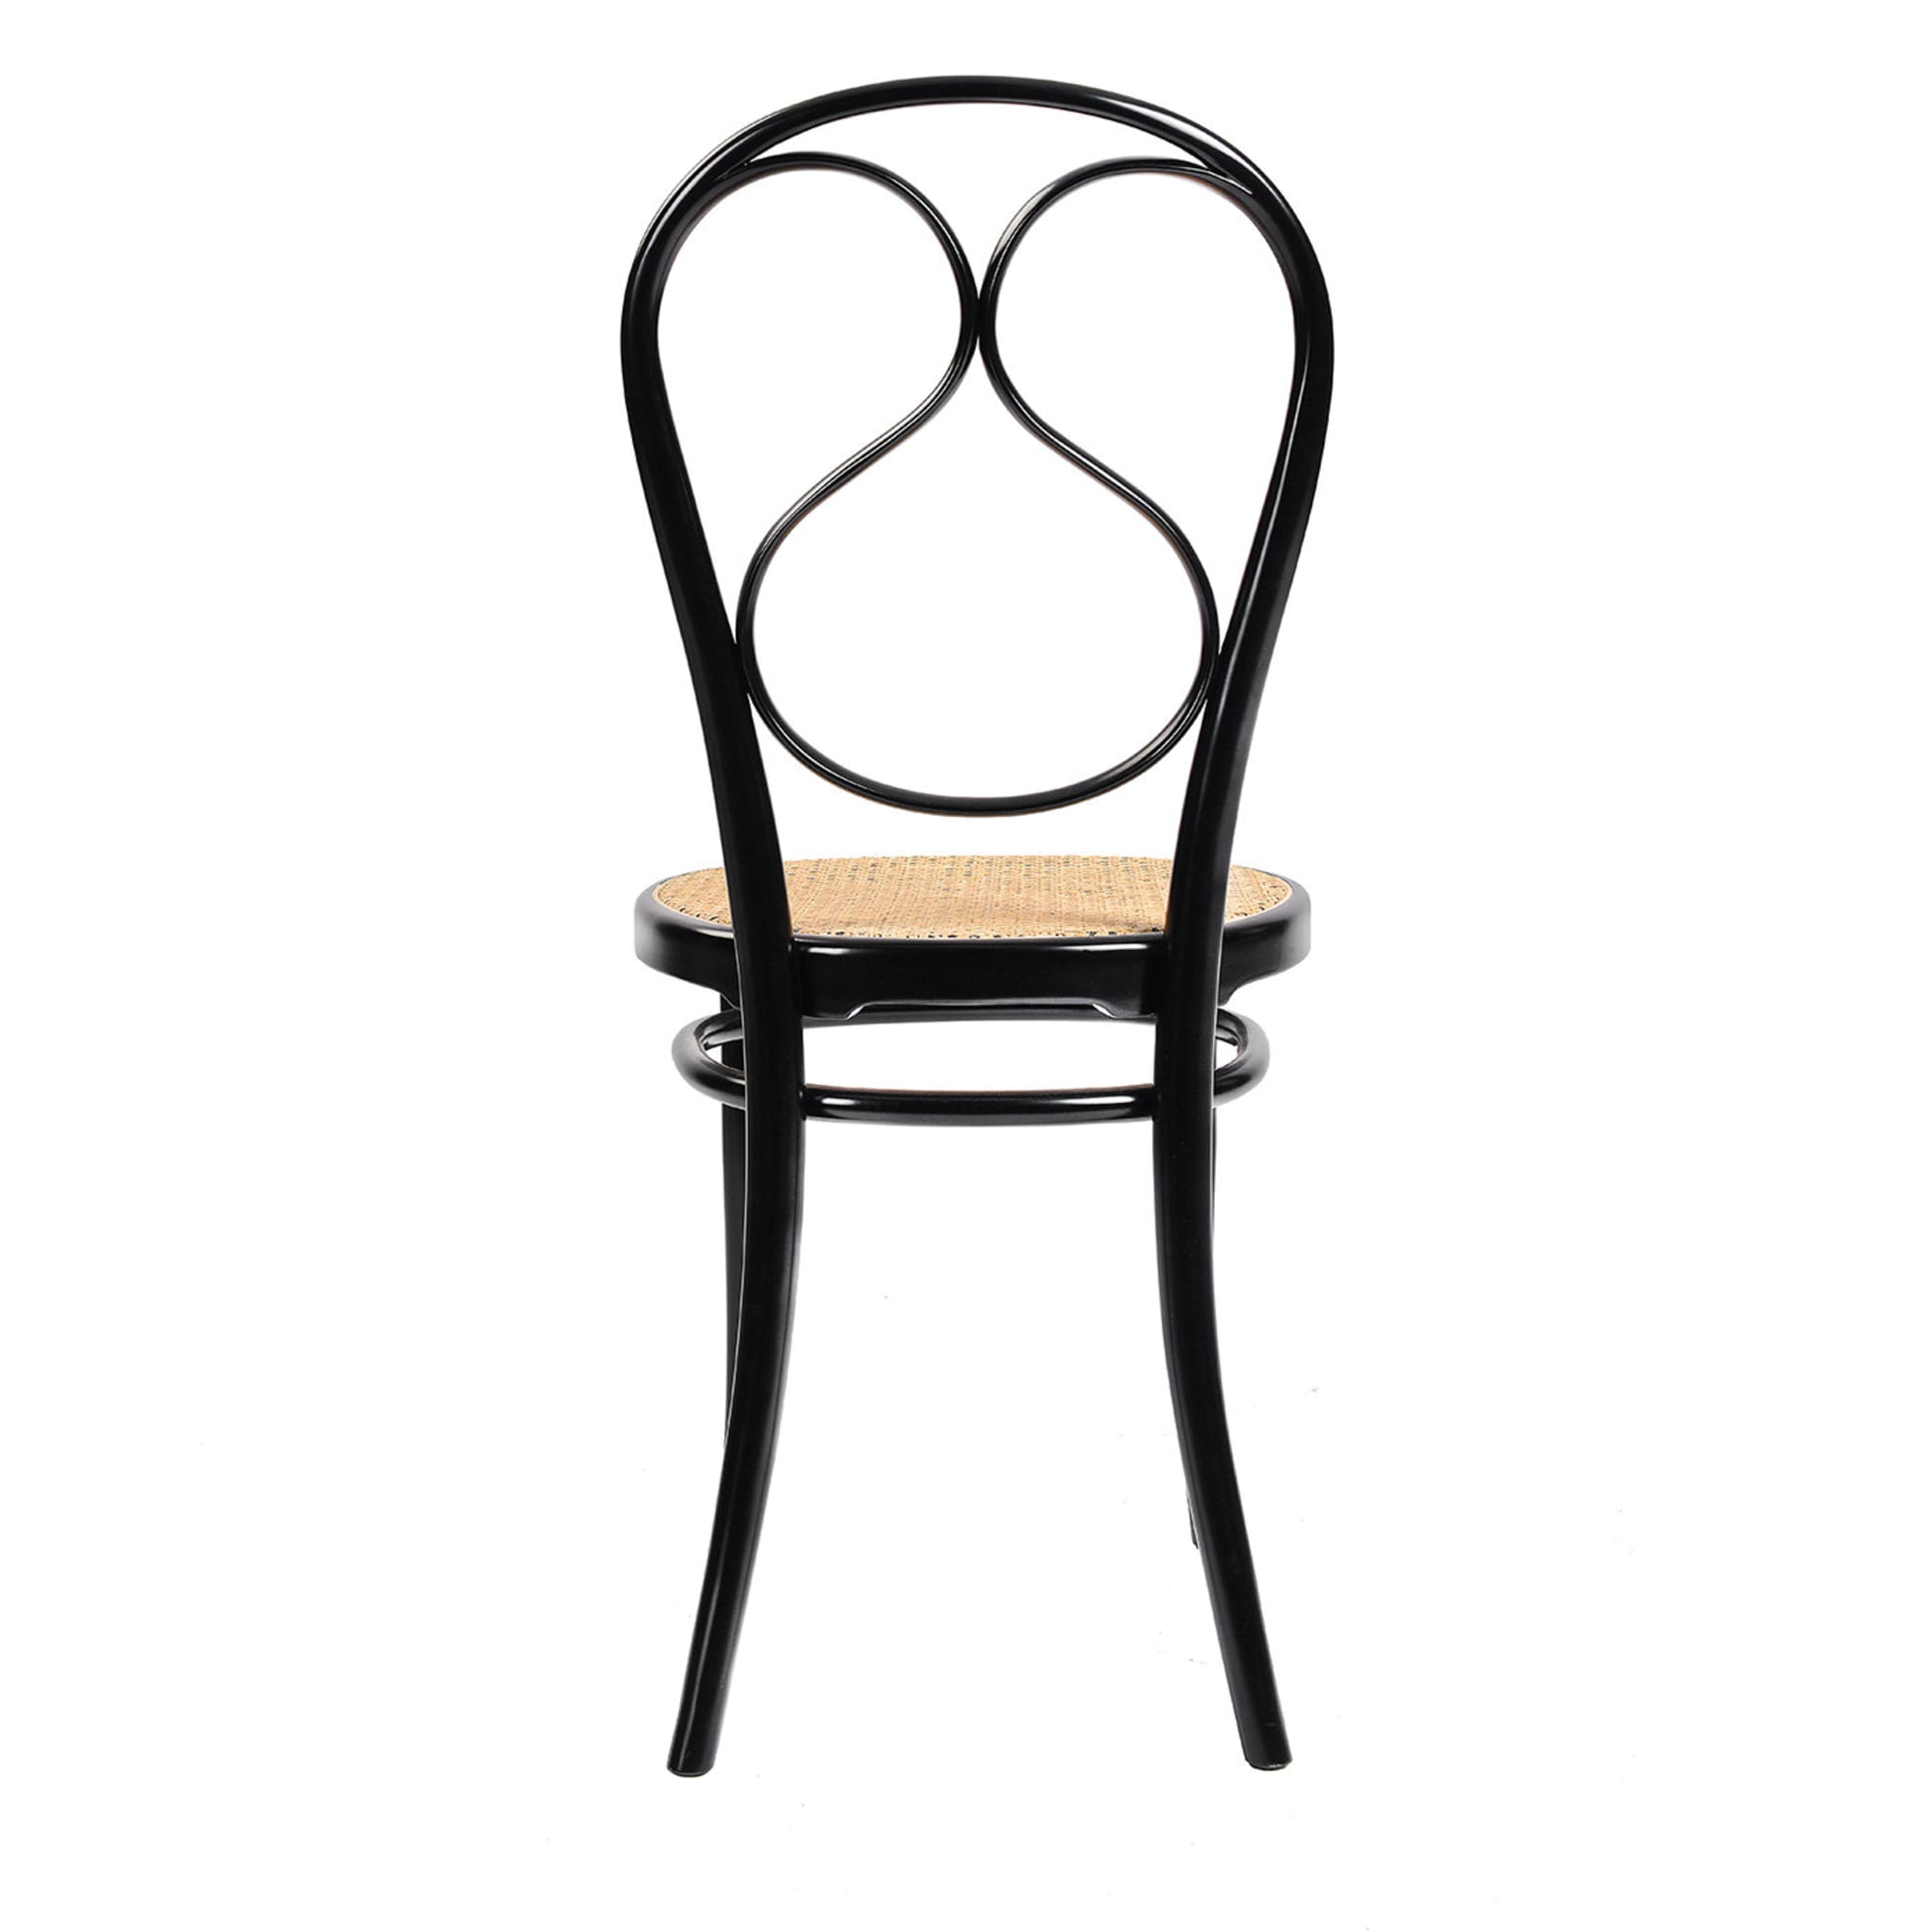 No. 1 Chair by Michael Thonet - Alternative view 1